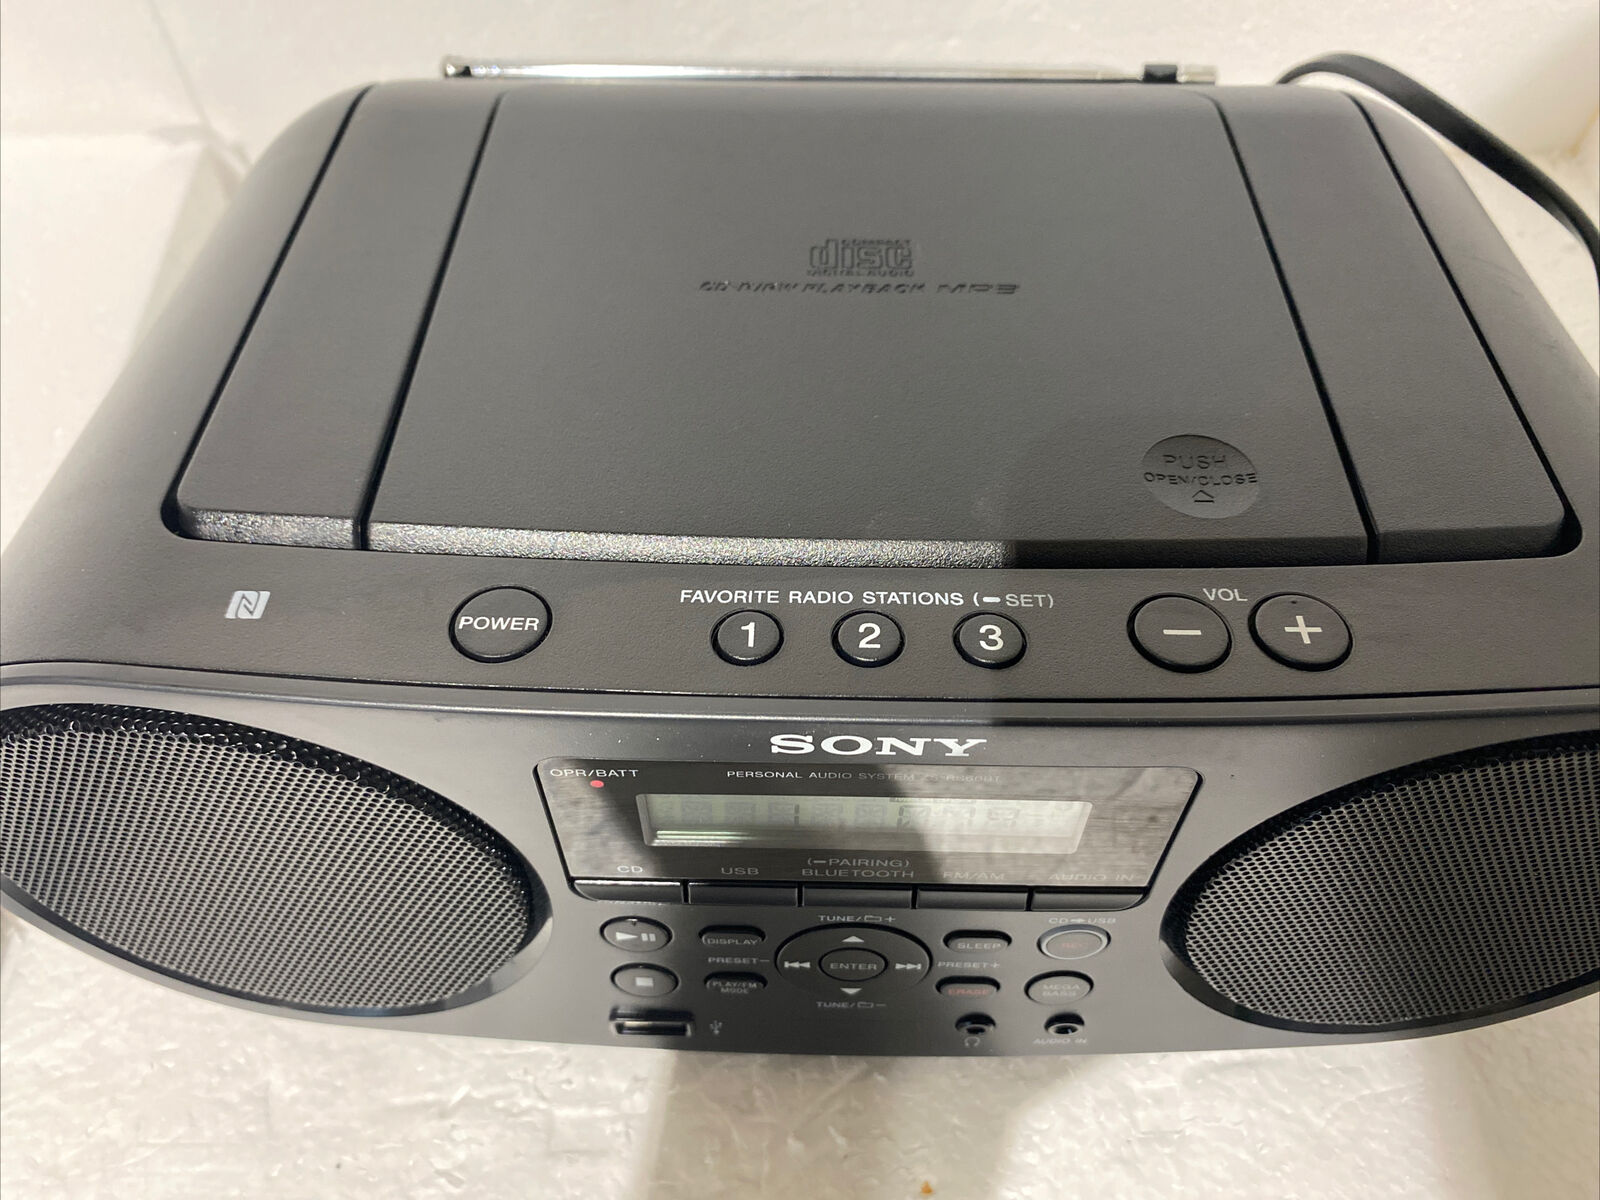 Sony ZS-RS60BT Bluetooth Boombox - Black for sale online | eBay